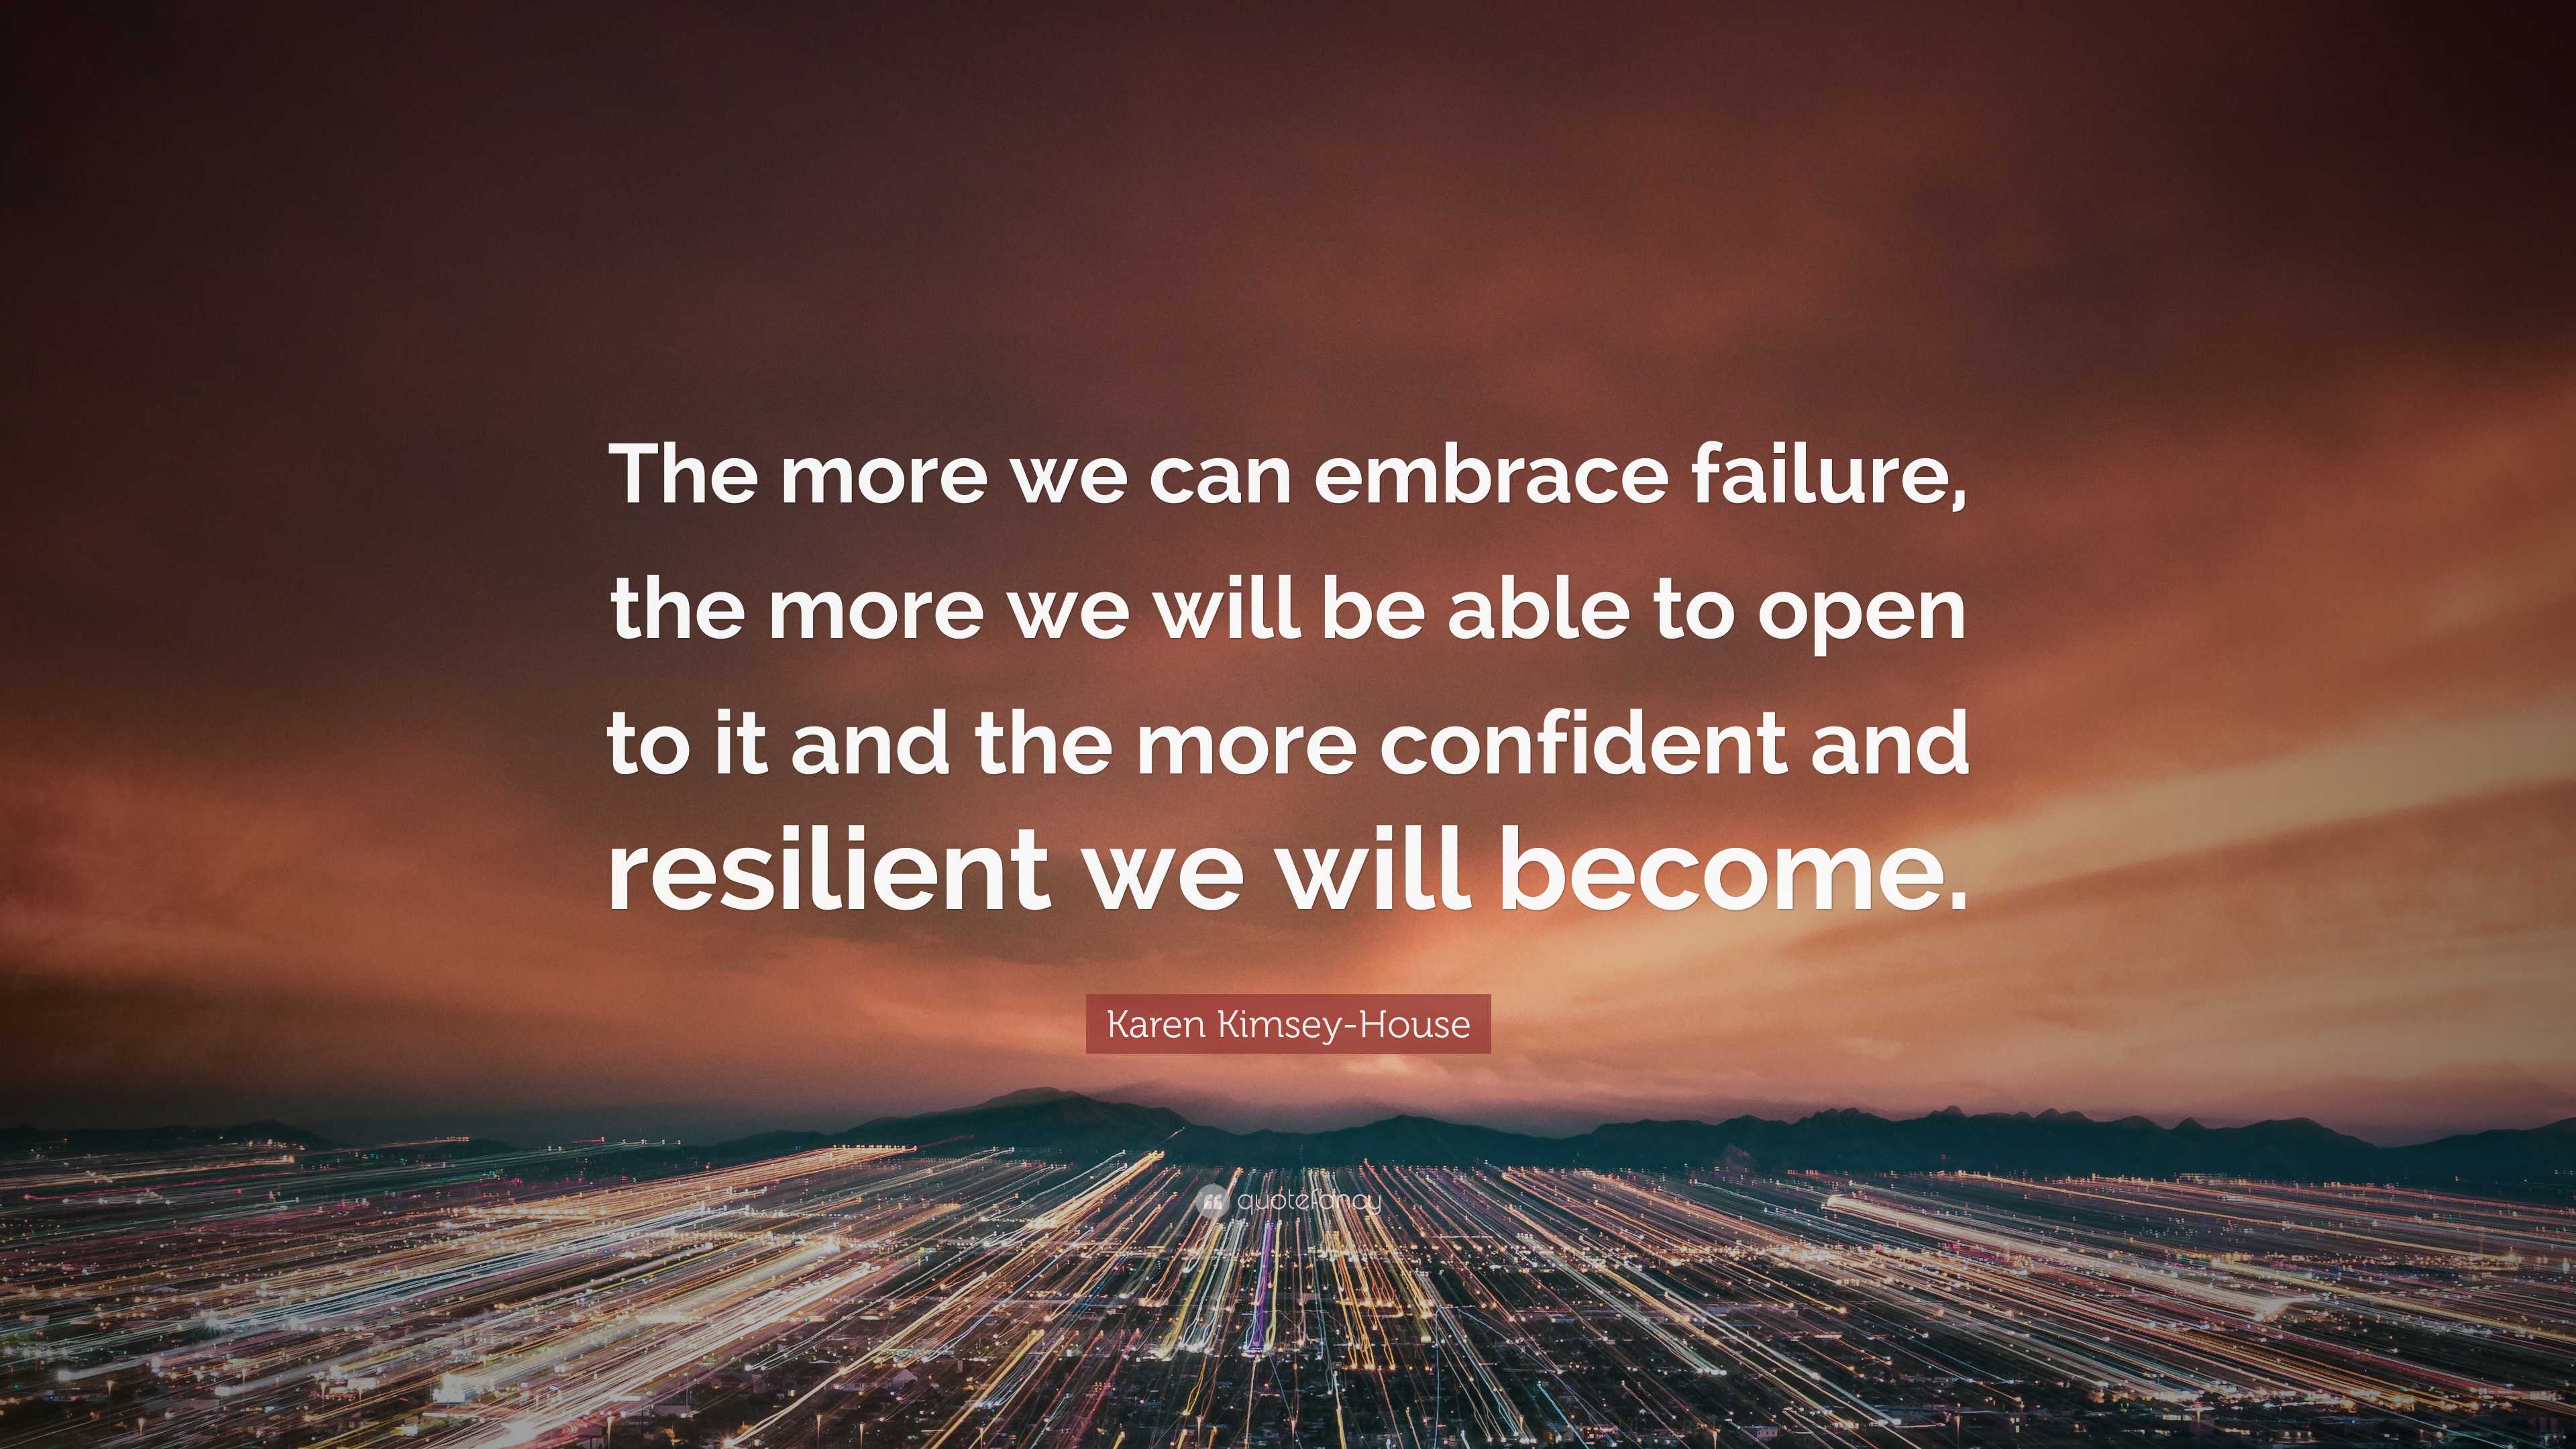 Karen Kimsey-House Quote: “The more we can embrace failure, the more we ...